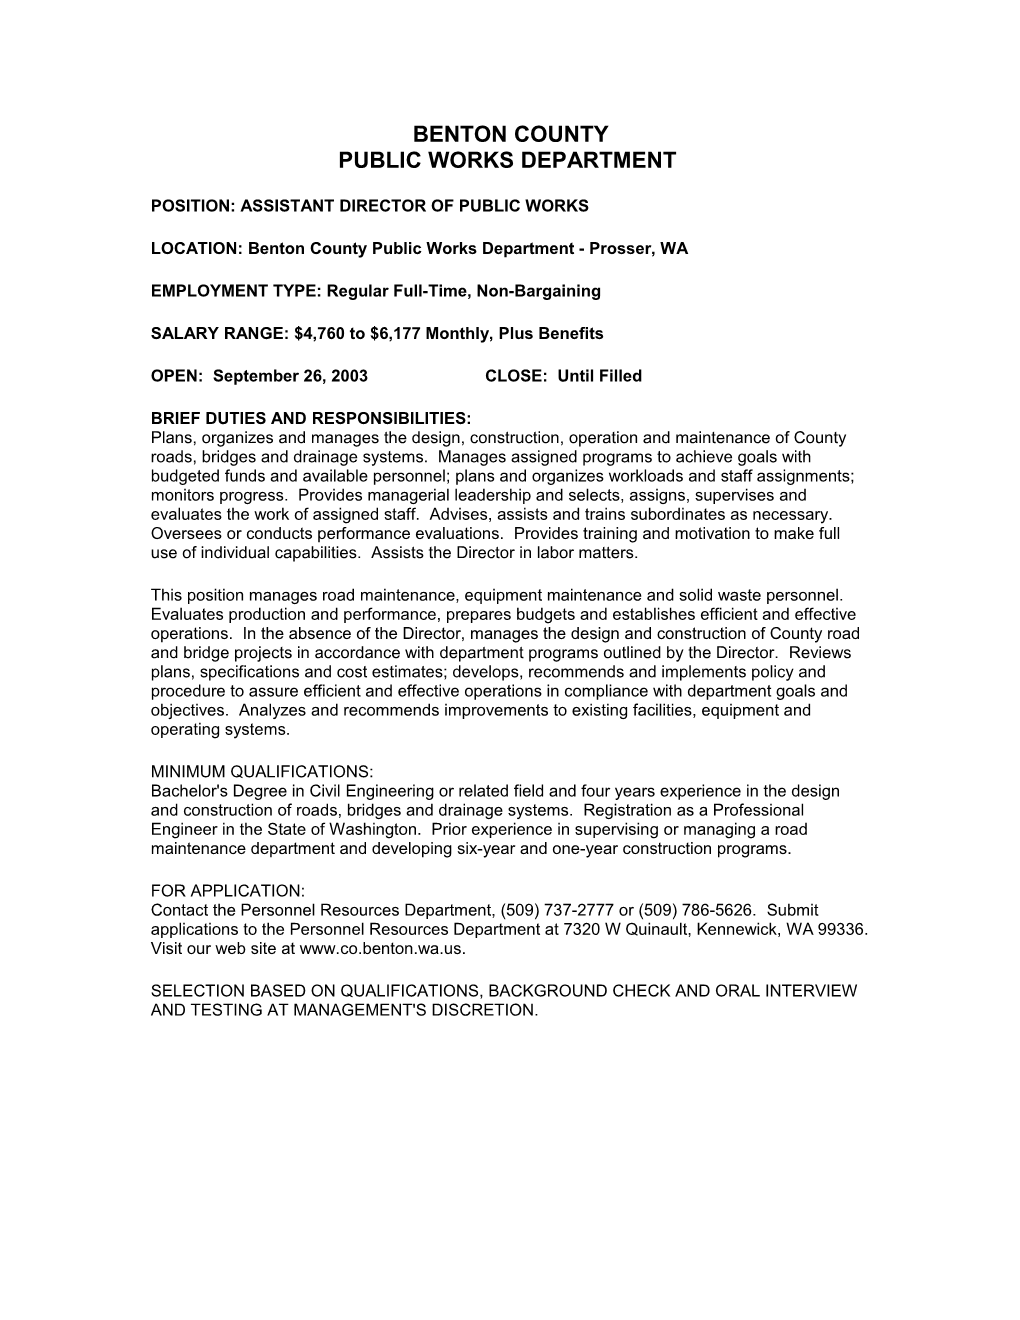 Position: Assistant Director of Public Works